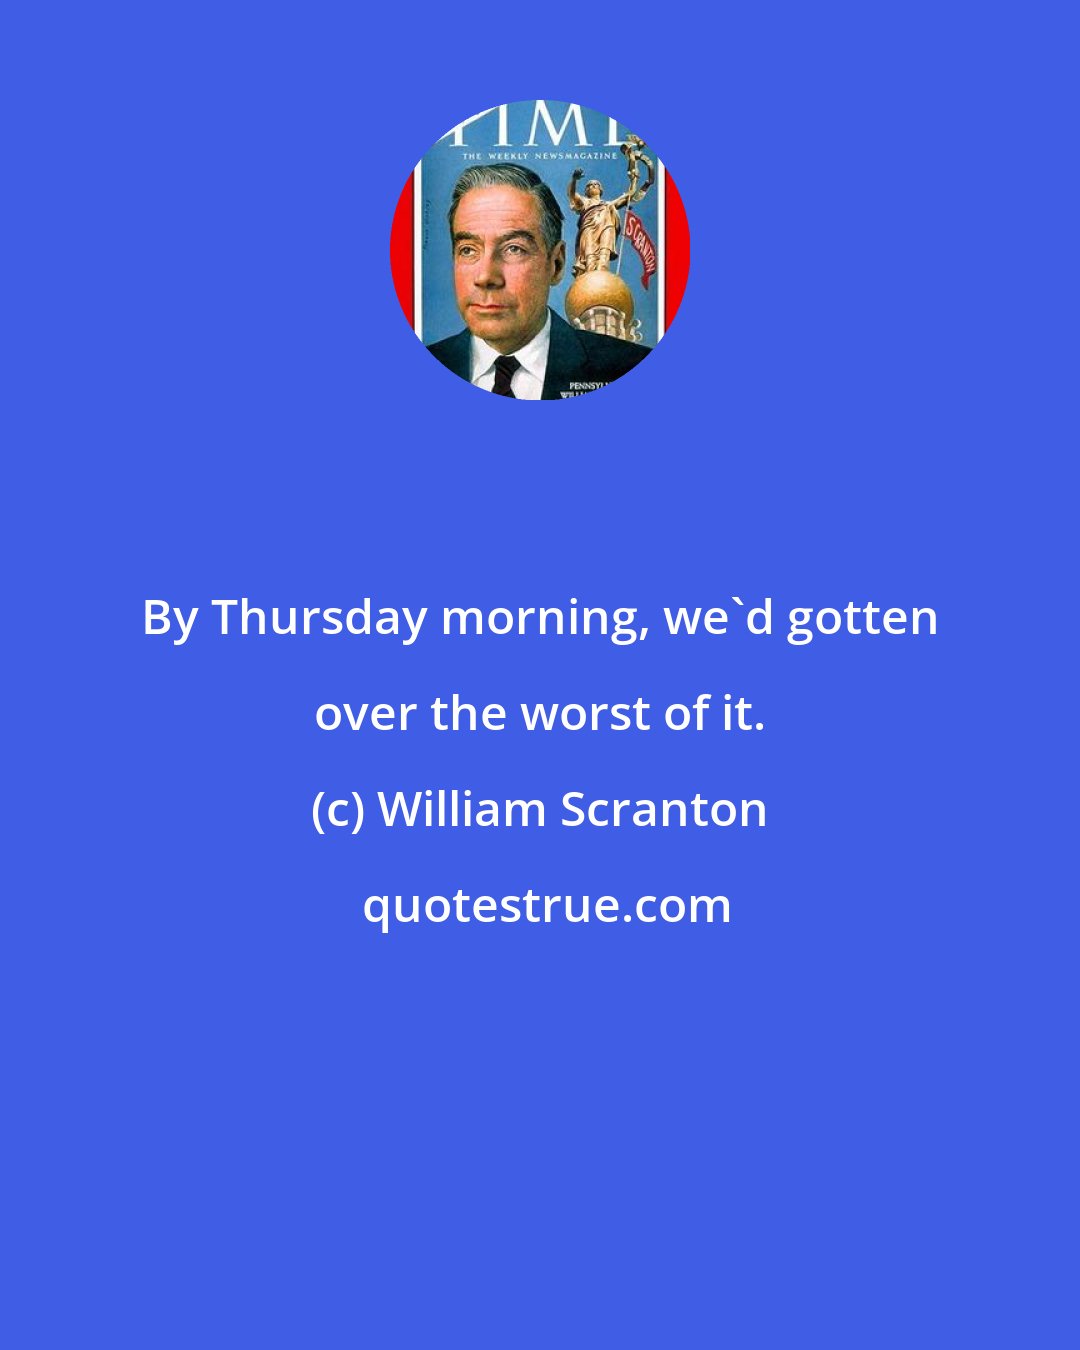 William Scranton: By Thursday morning, we'd gotten over the worst of it.